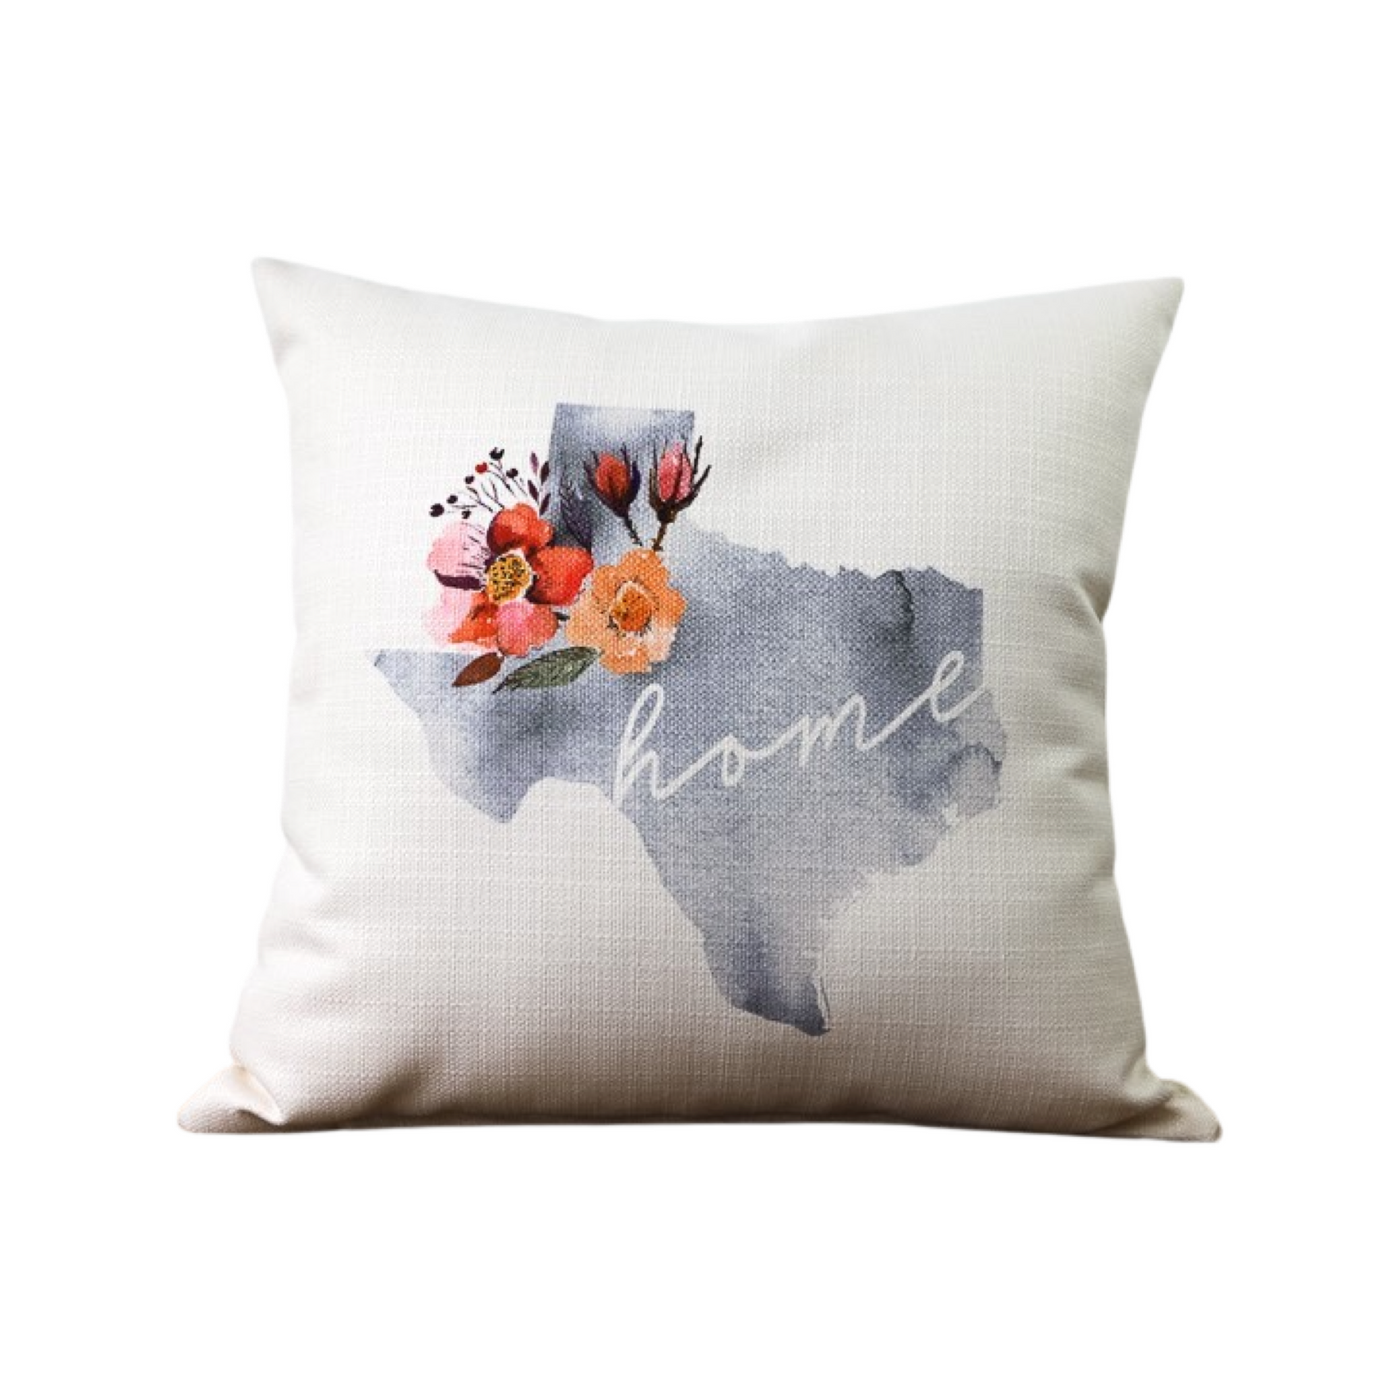 White throw pillow with watercolor Texas state print with floral accents reads “home” in script